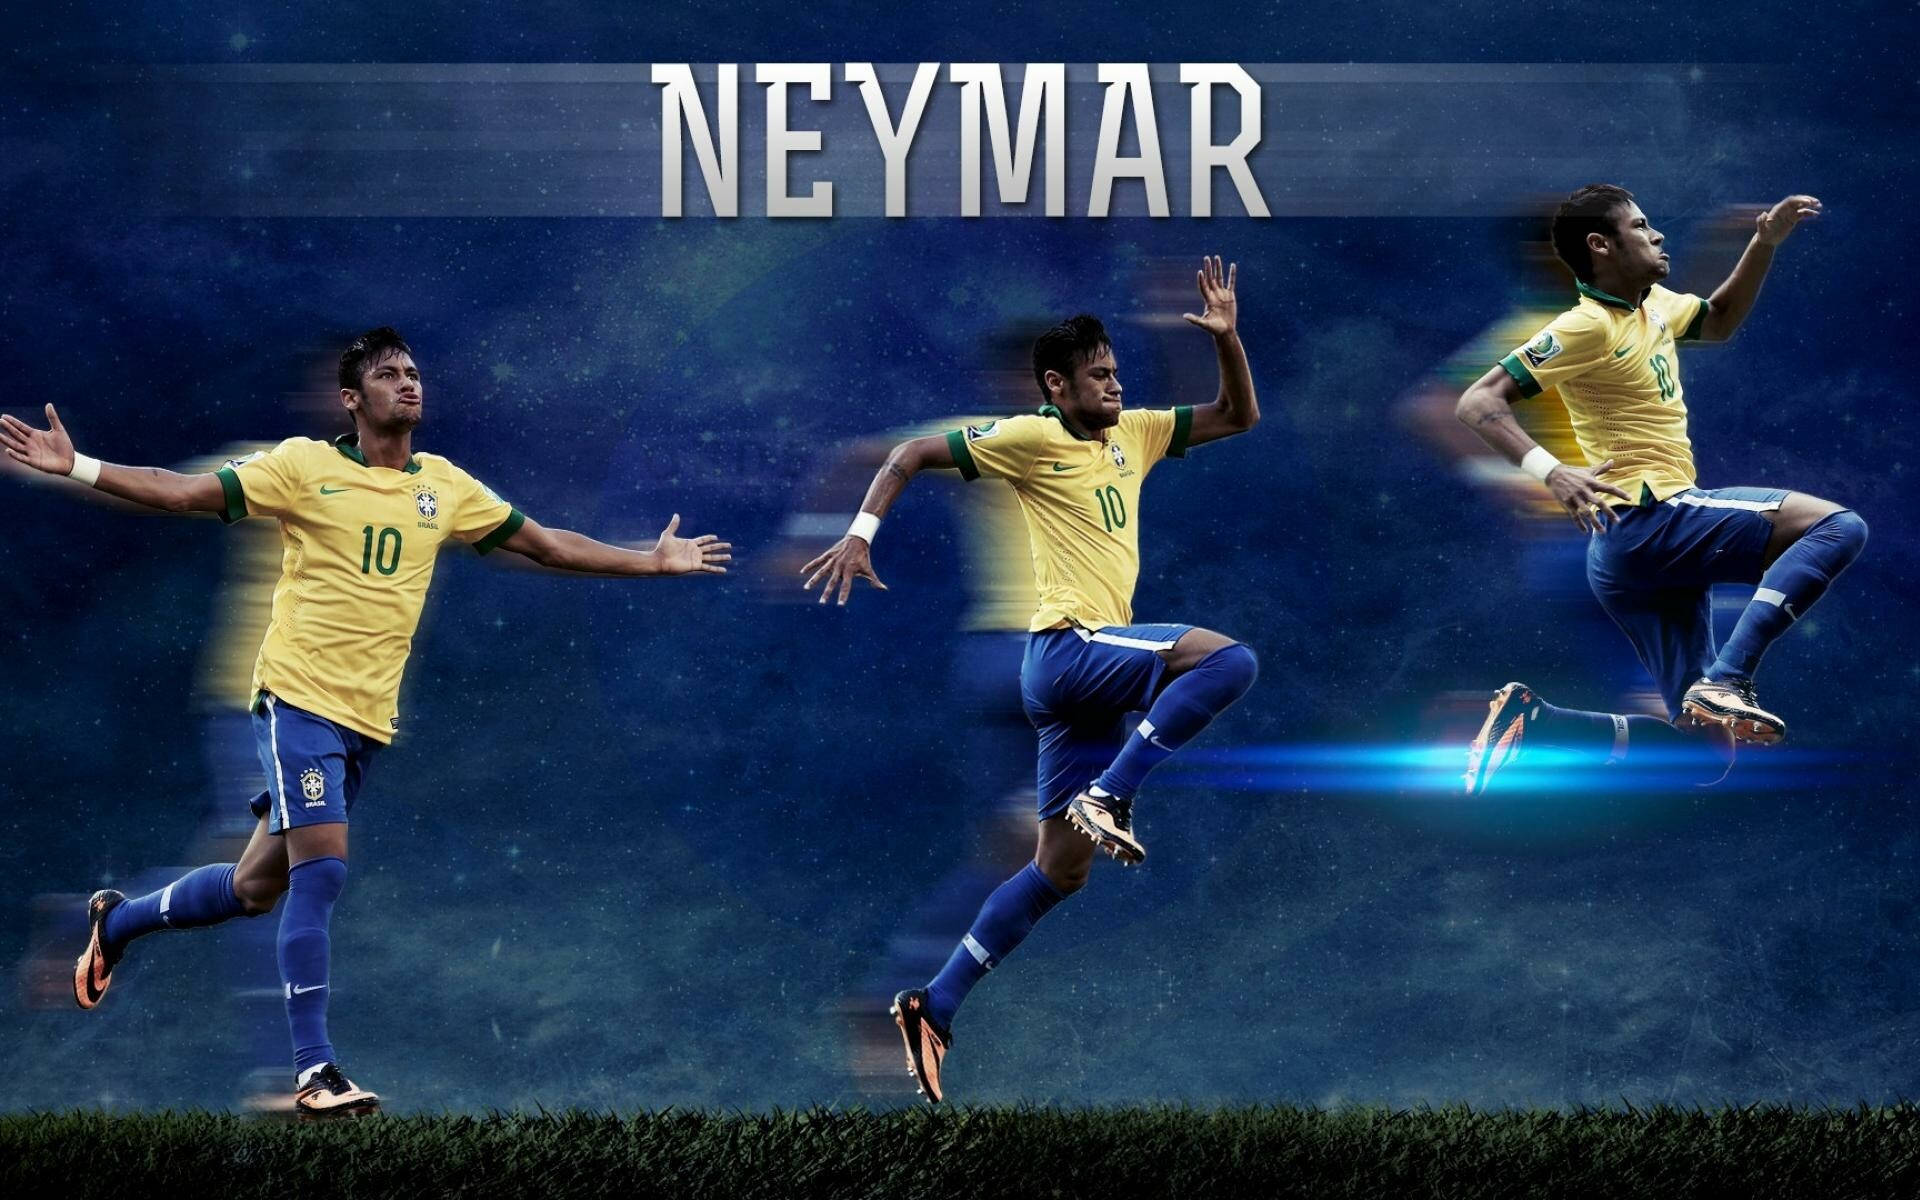 Soccer Players Jumping Action Wallpaper